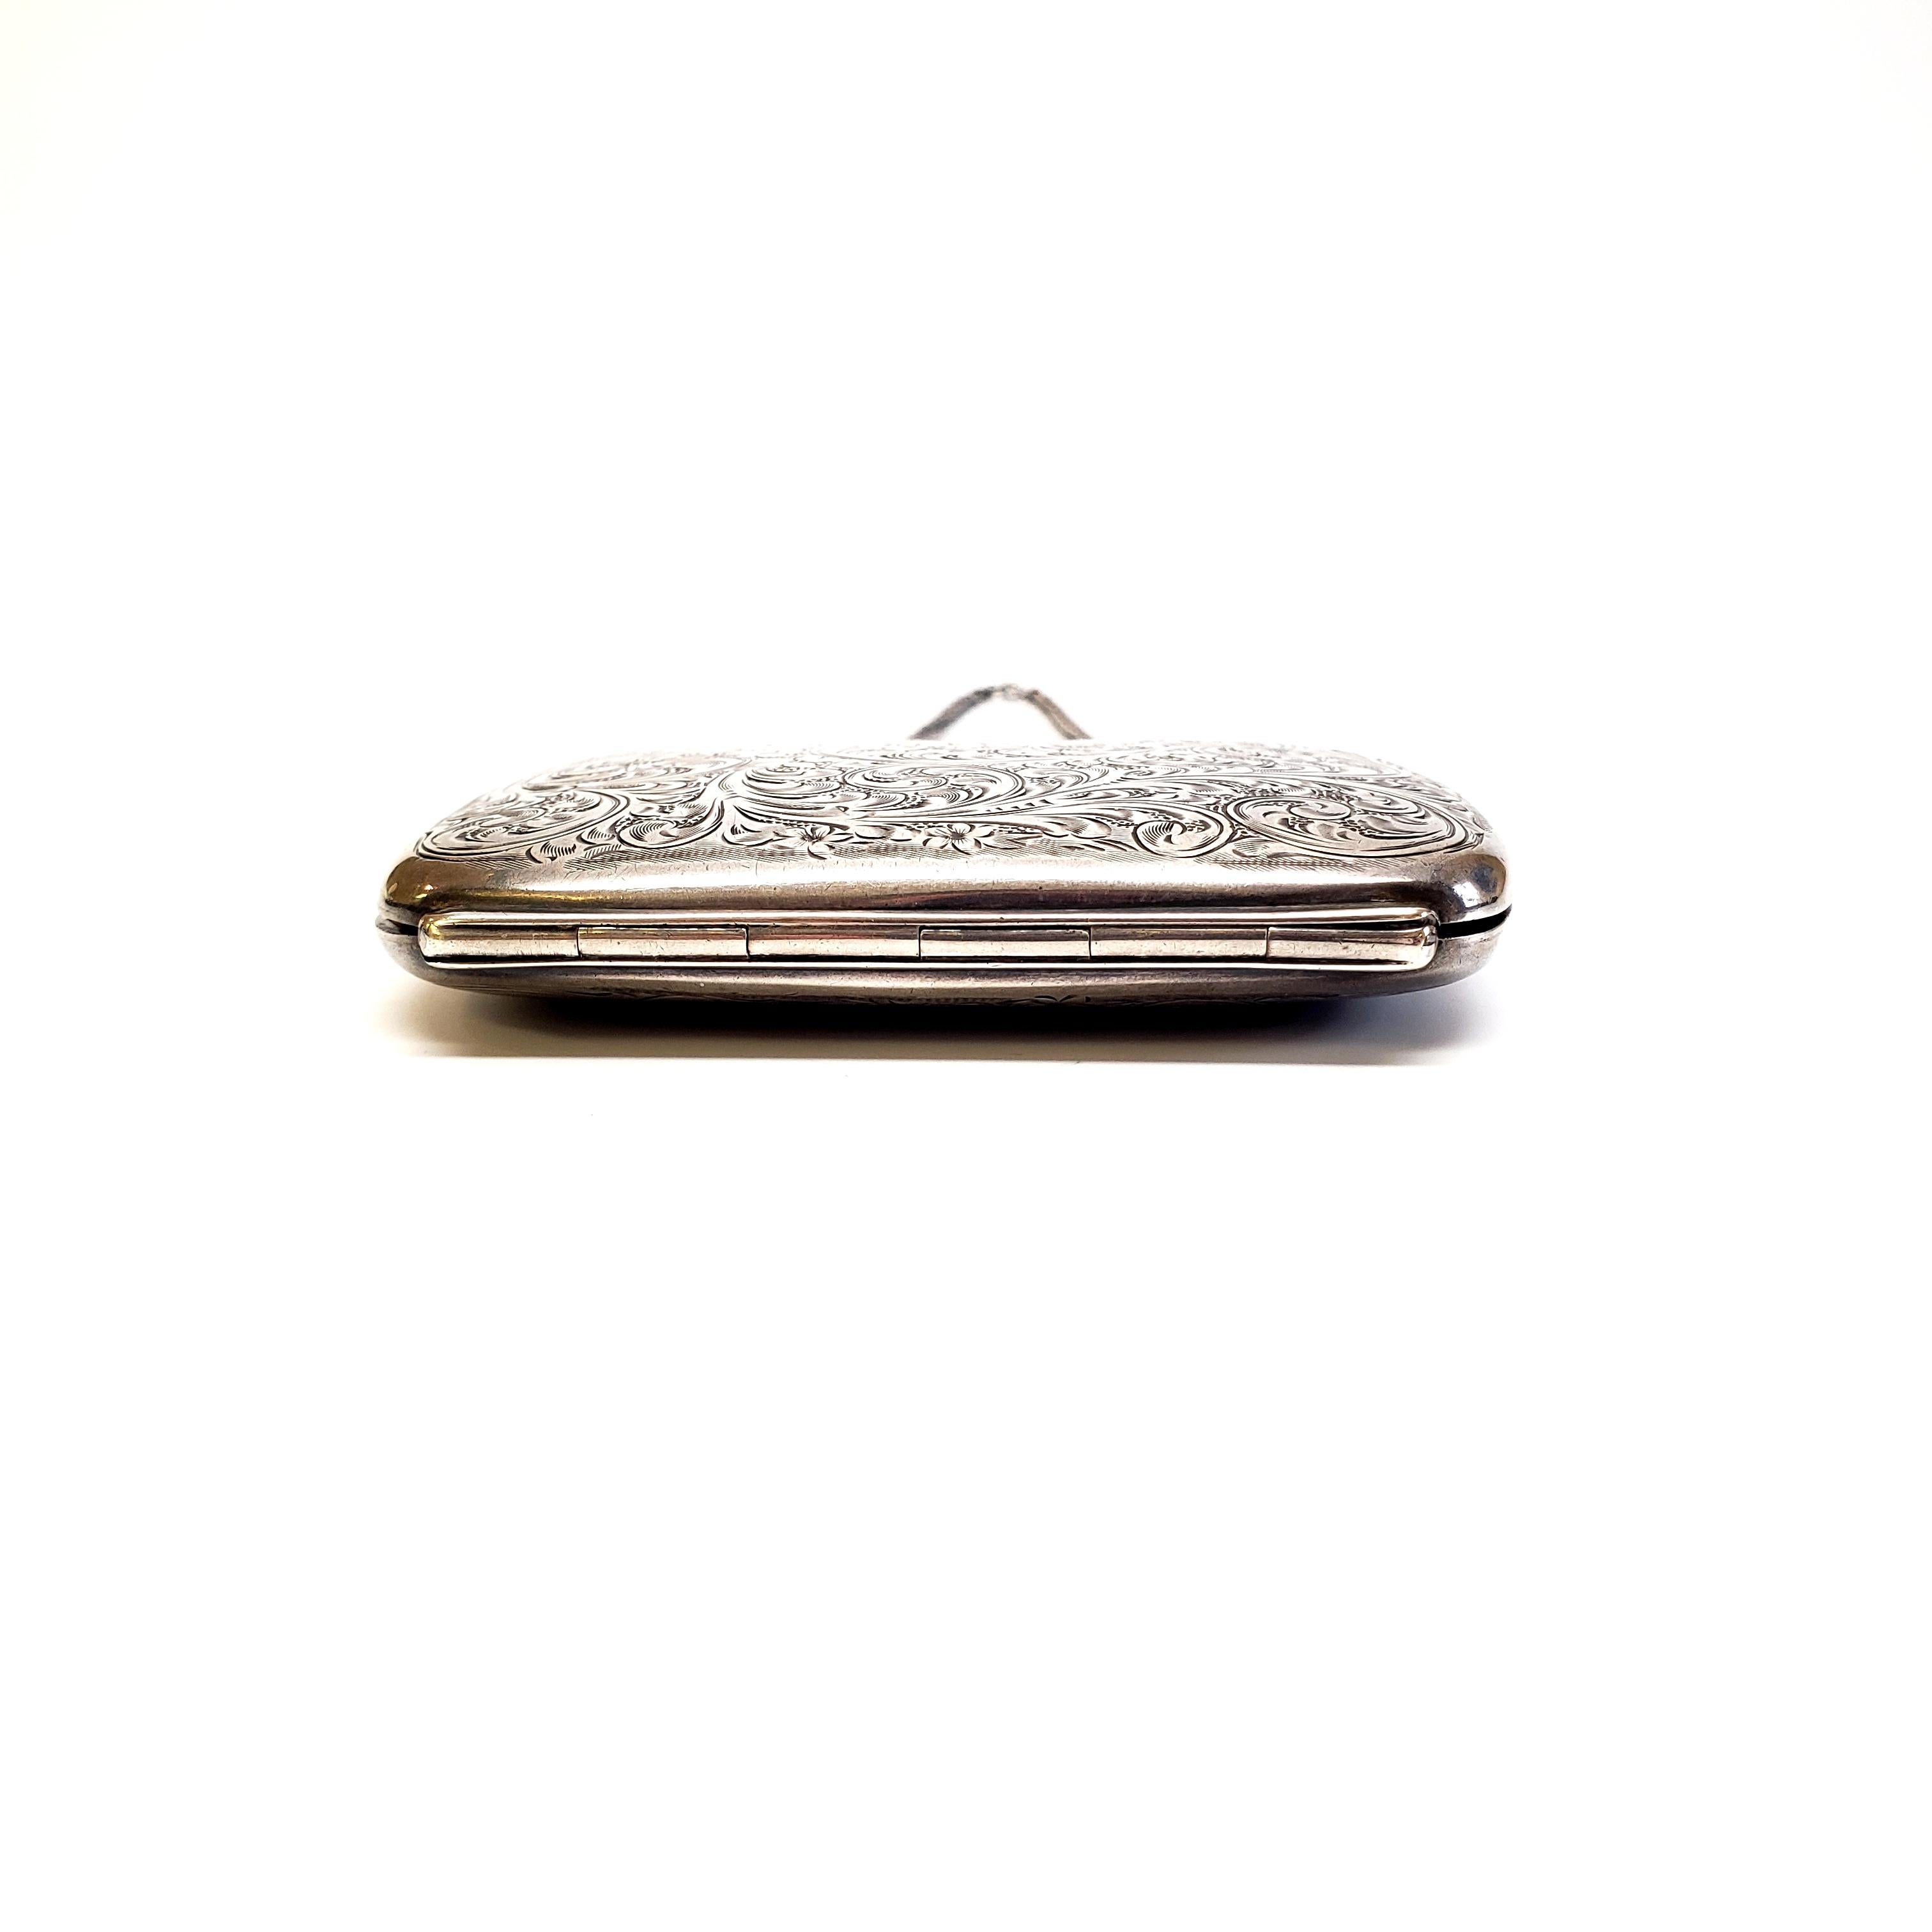 Vintage La Pierre Mfg Co Sterling Silver Compact Coin Purse #7197 In Good Condition For Sale In Washington Depot, CT